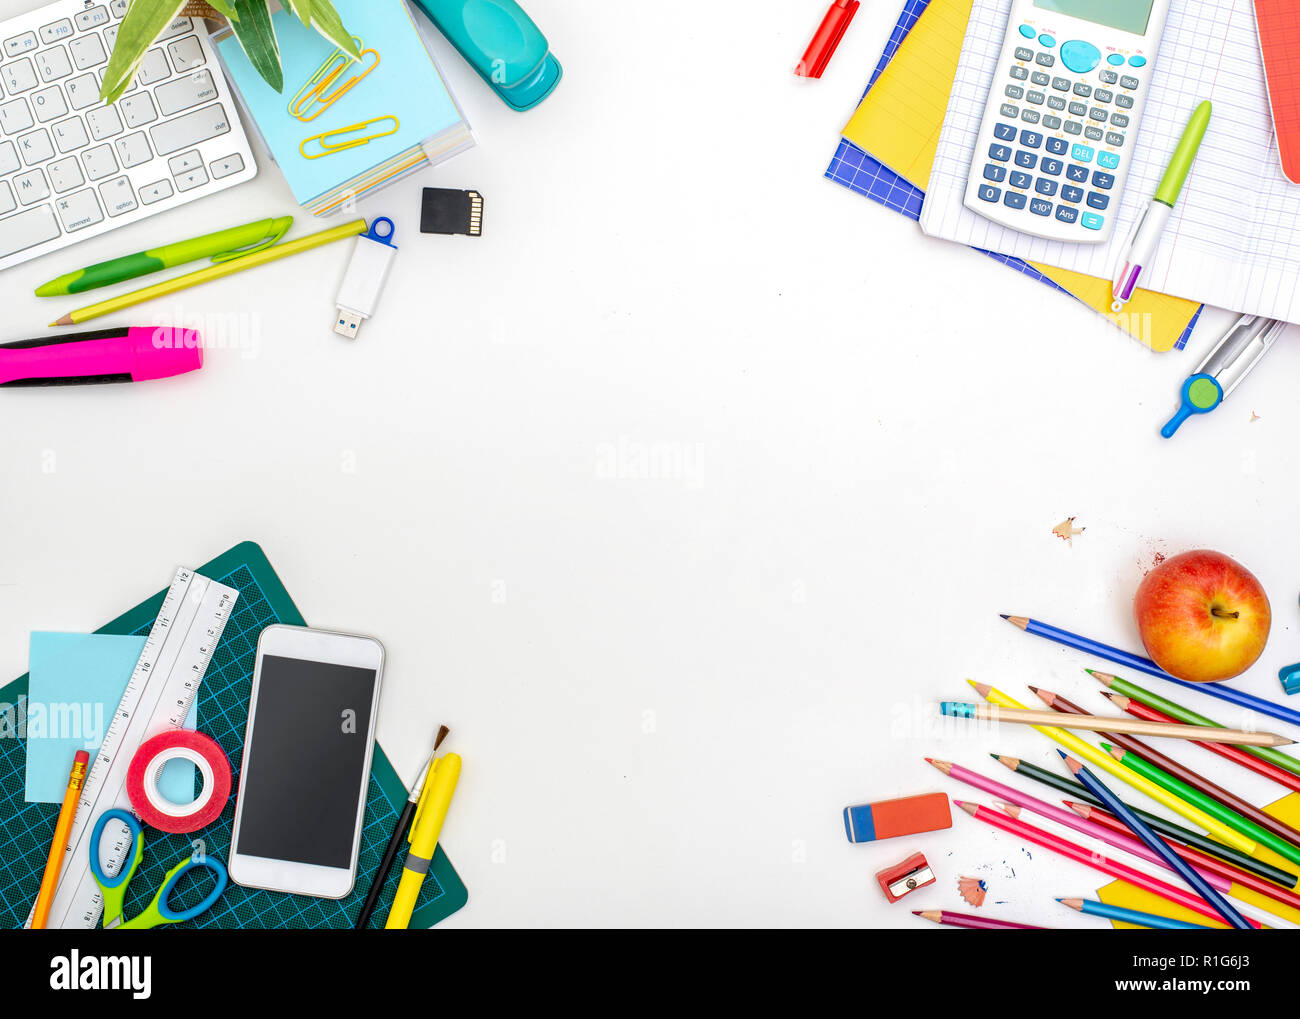 Back to school background header on white. Colorful school items. Stock Photo